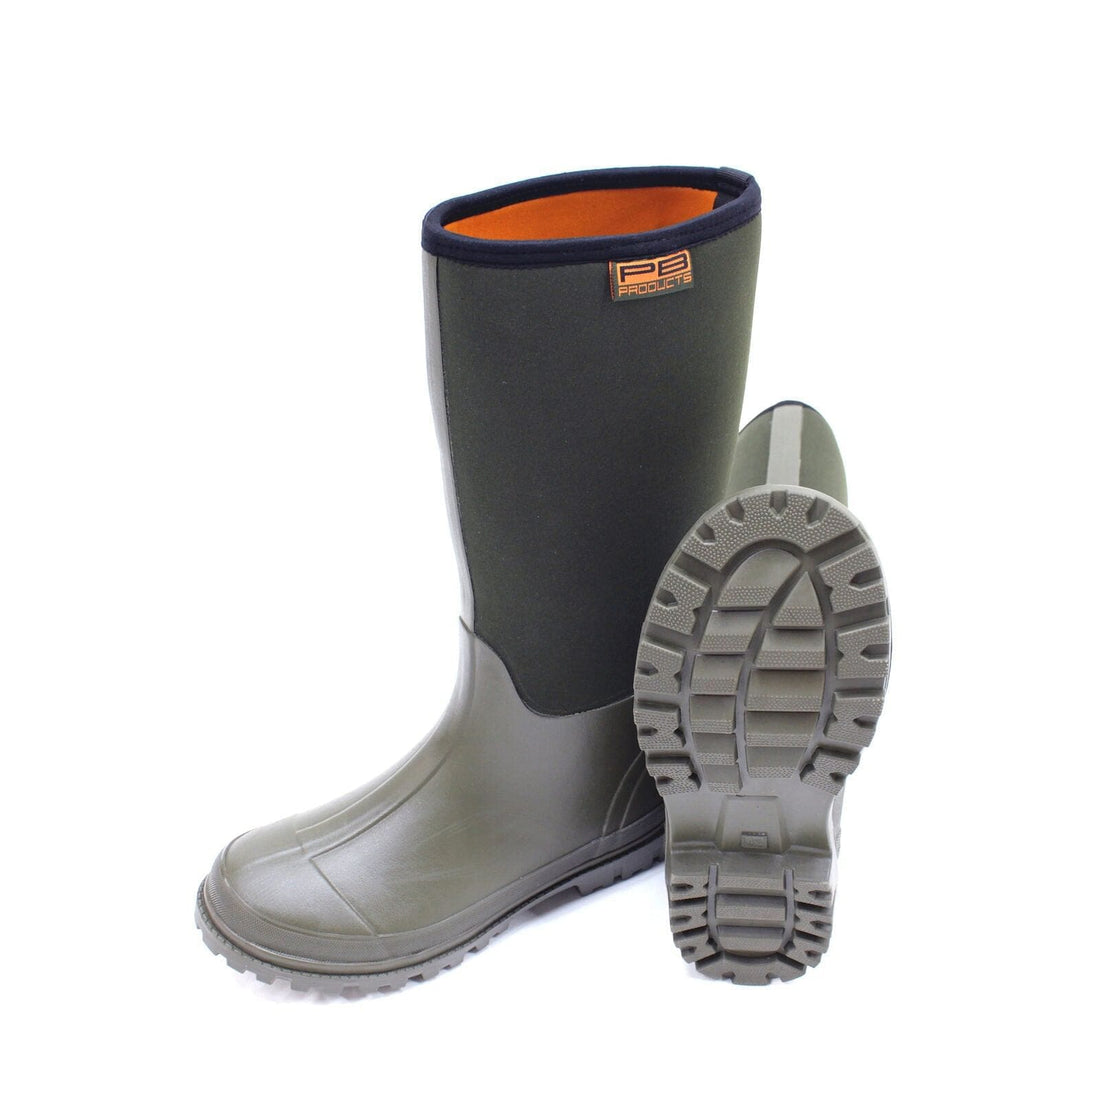 PB Products Neoprene Boots 6mm 41